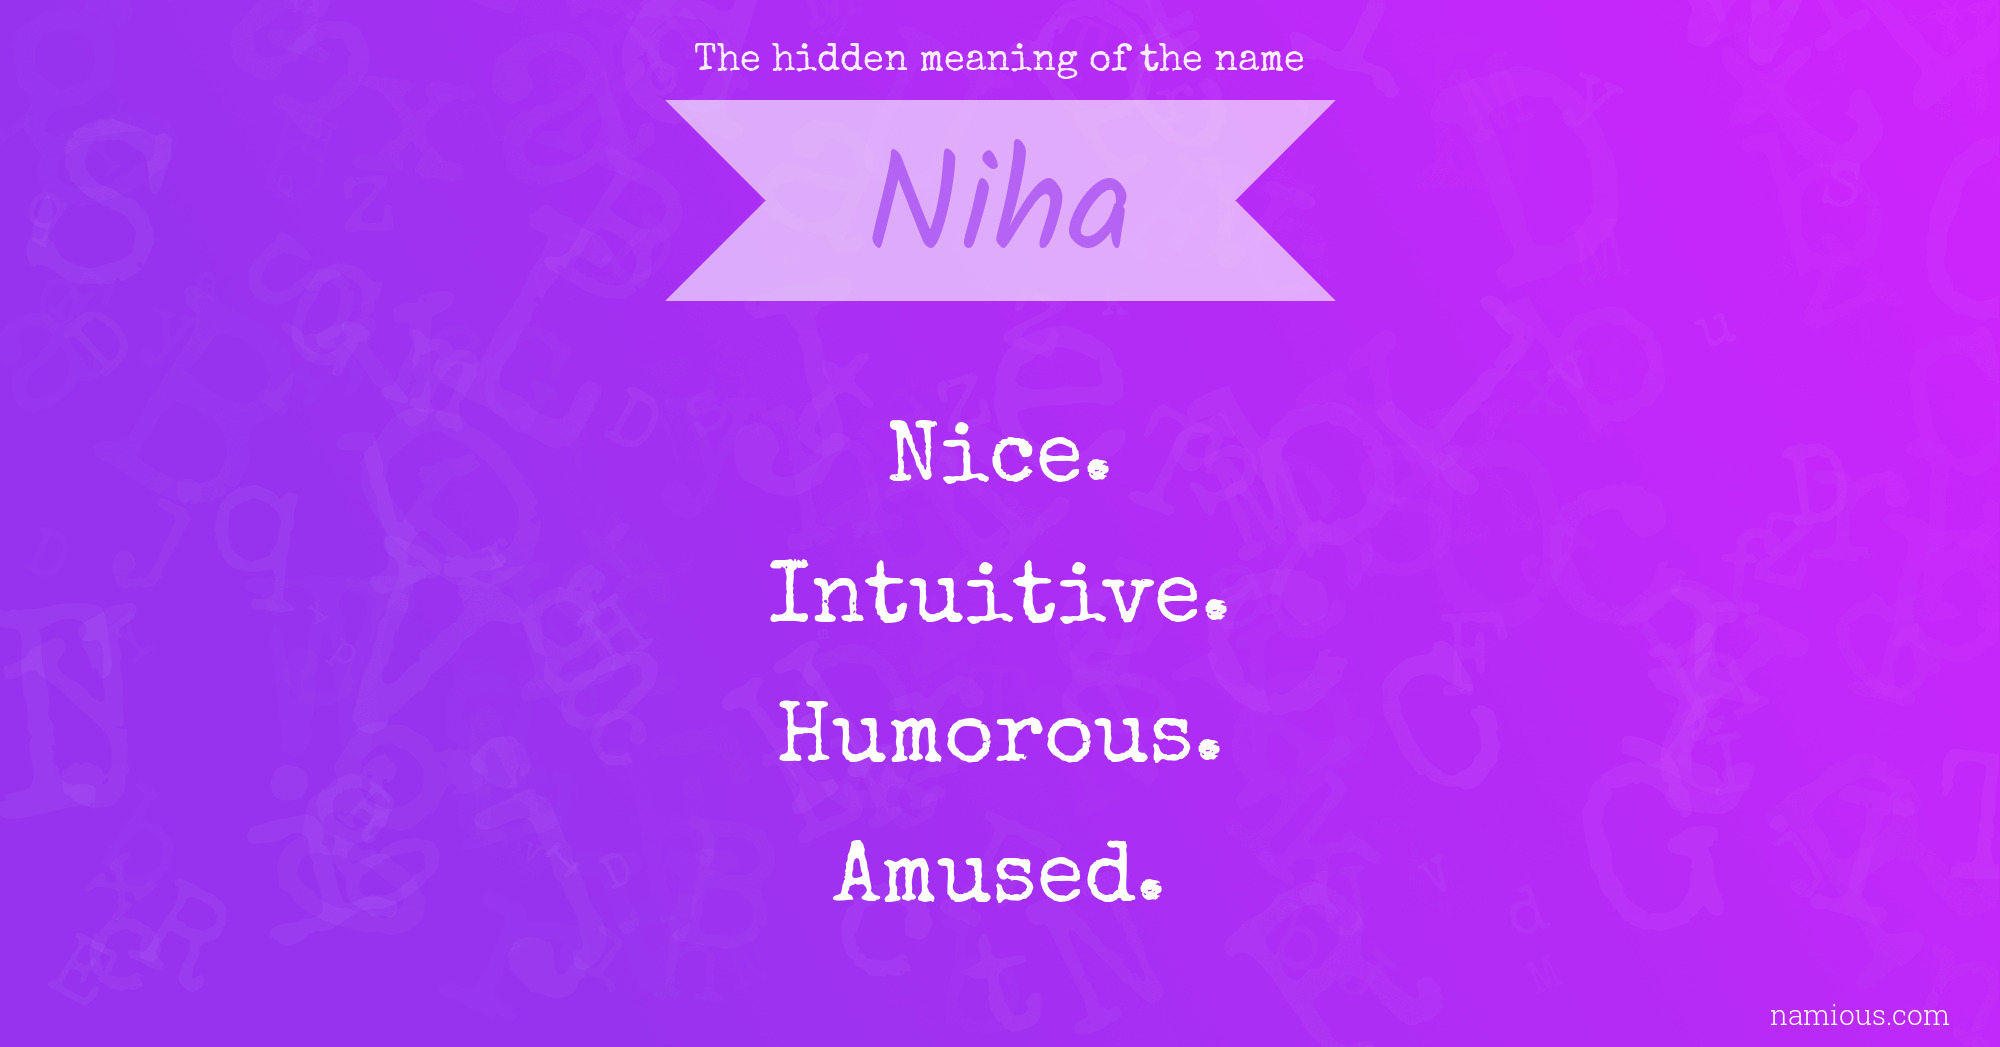 The hidden meaning of the name Niha